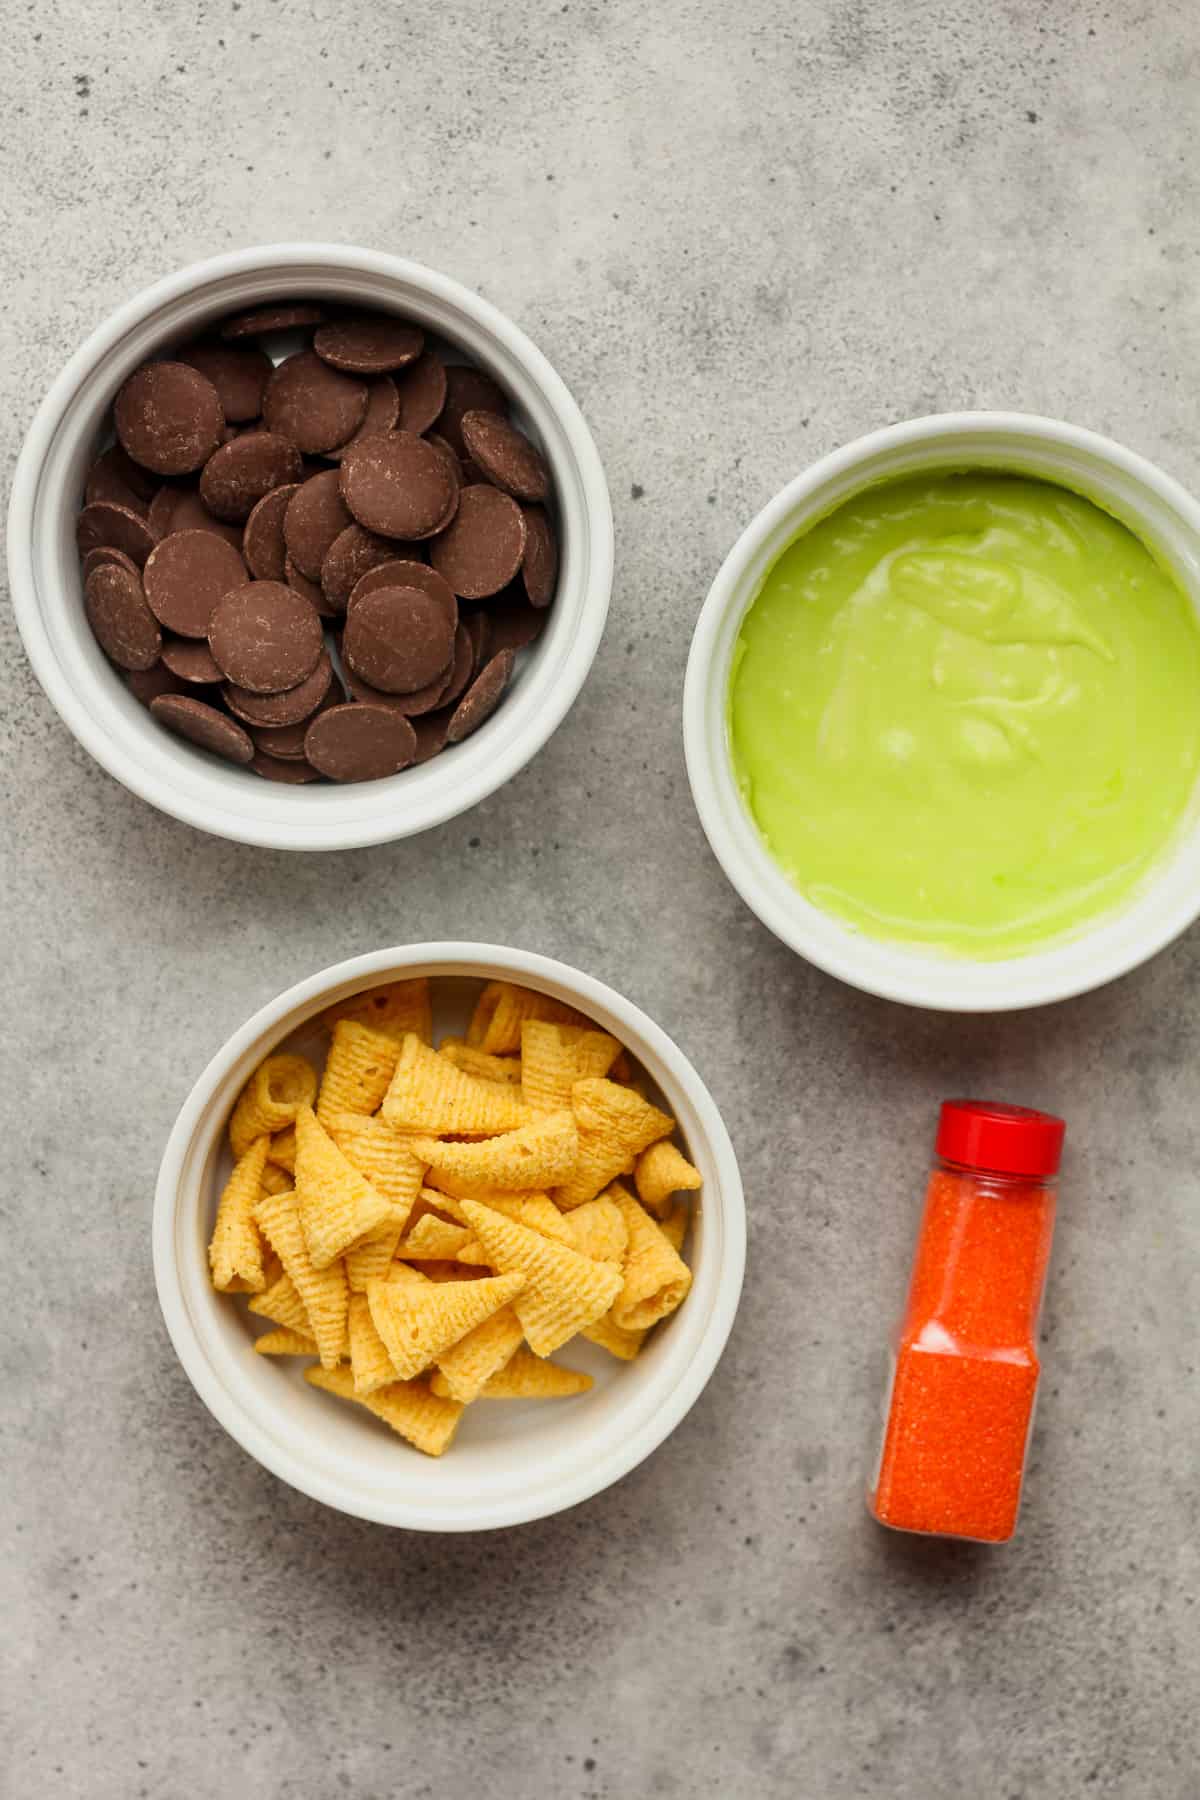 Bowls of the chocolate, bugles, green frosting, and orange sprinkles.